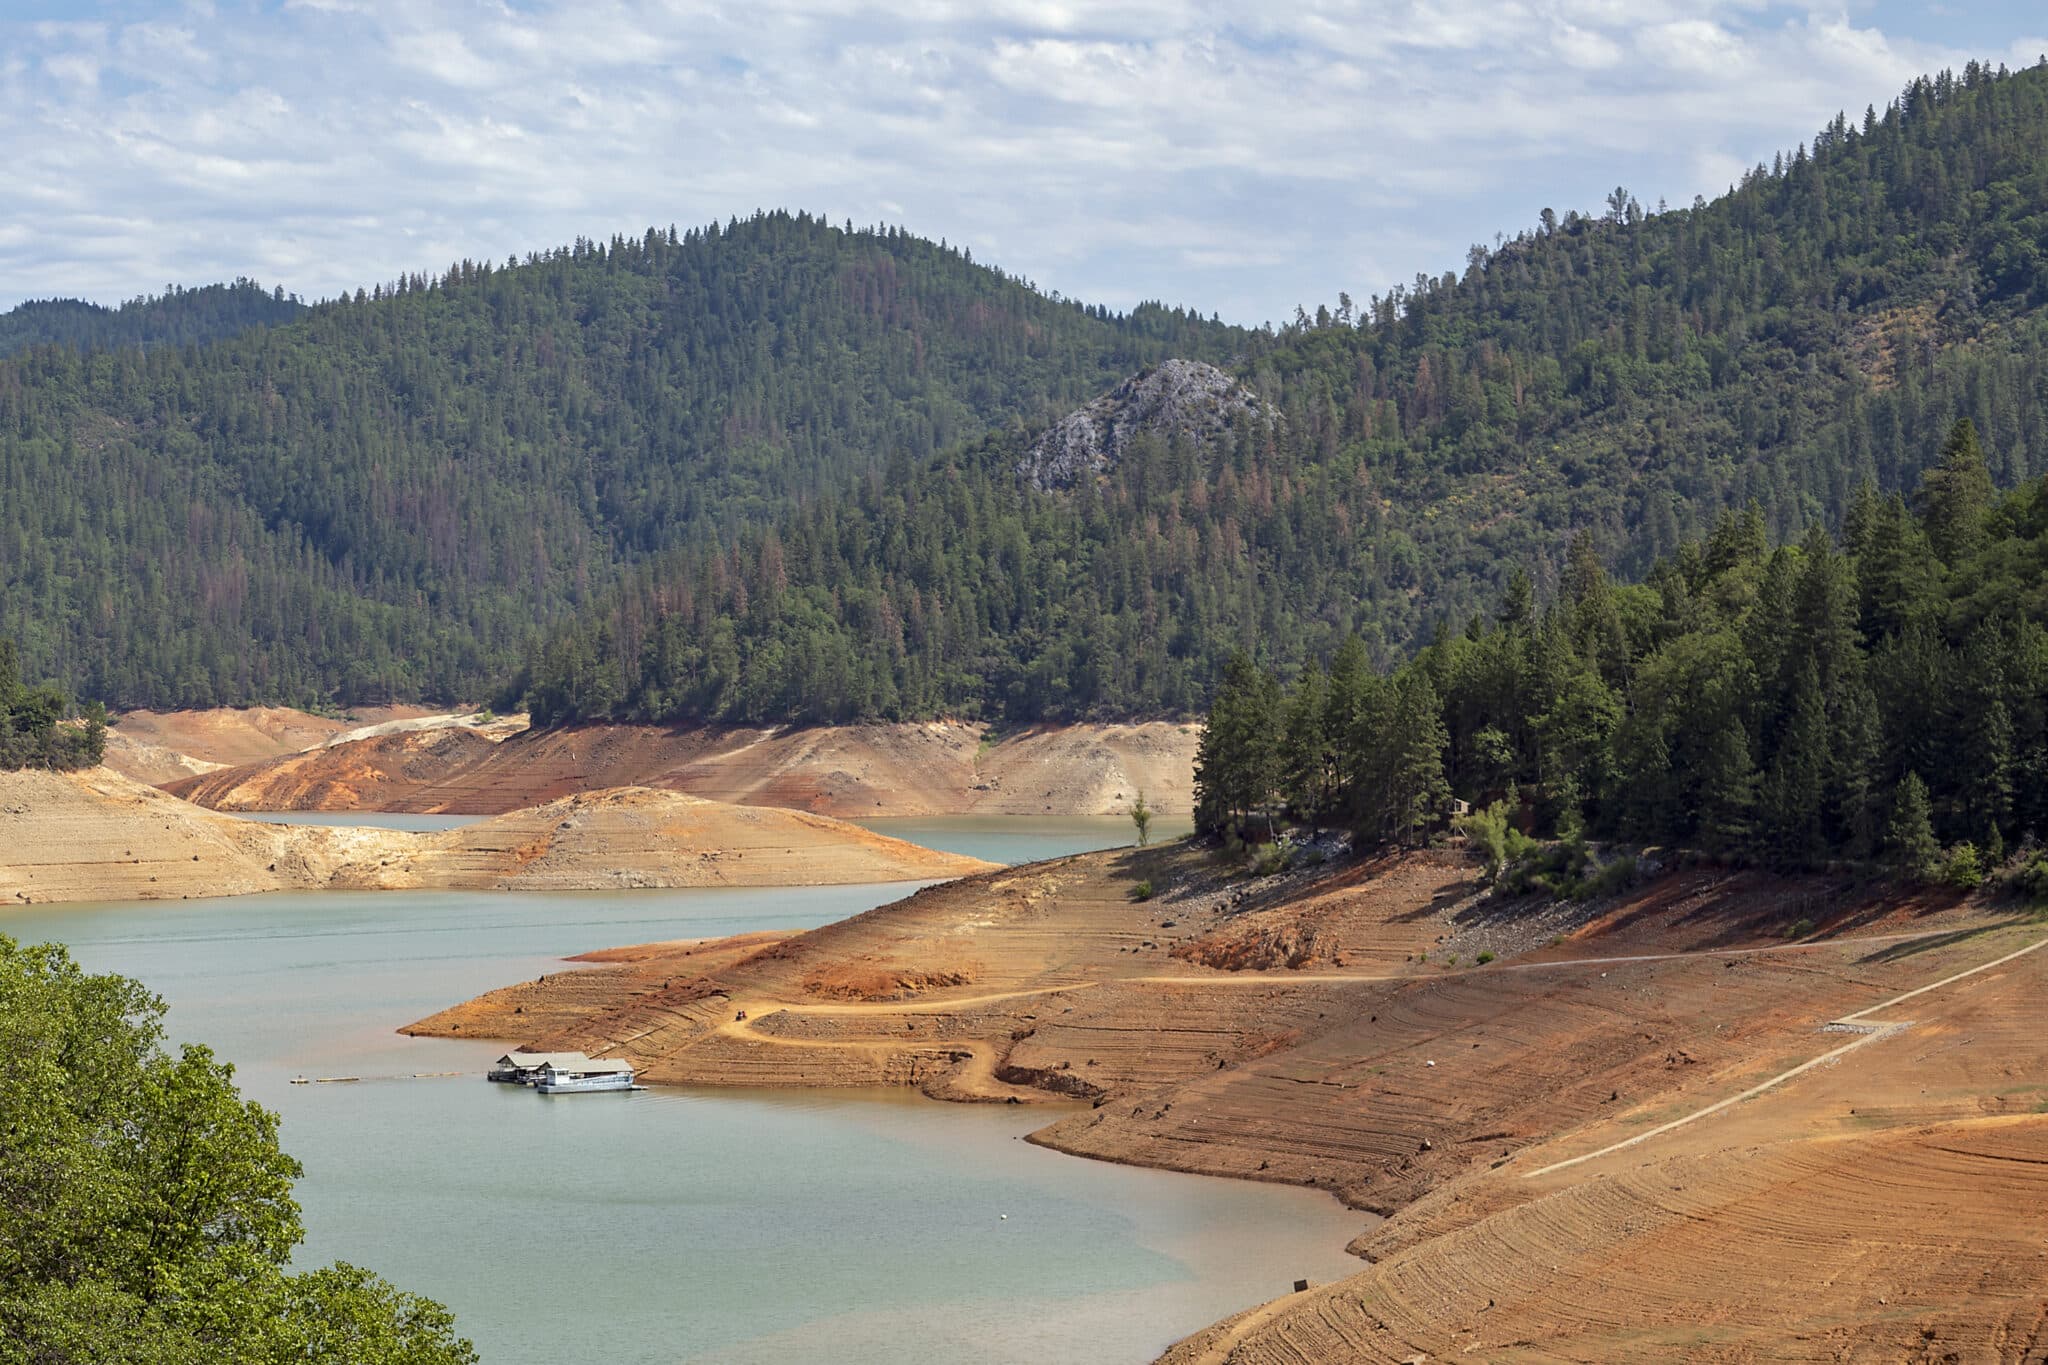 low water level at Shasta Lake, California due to drought